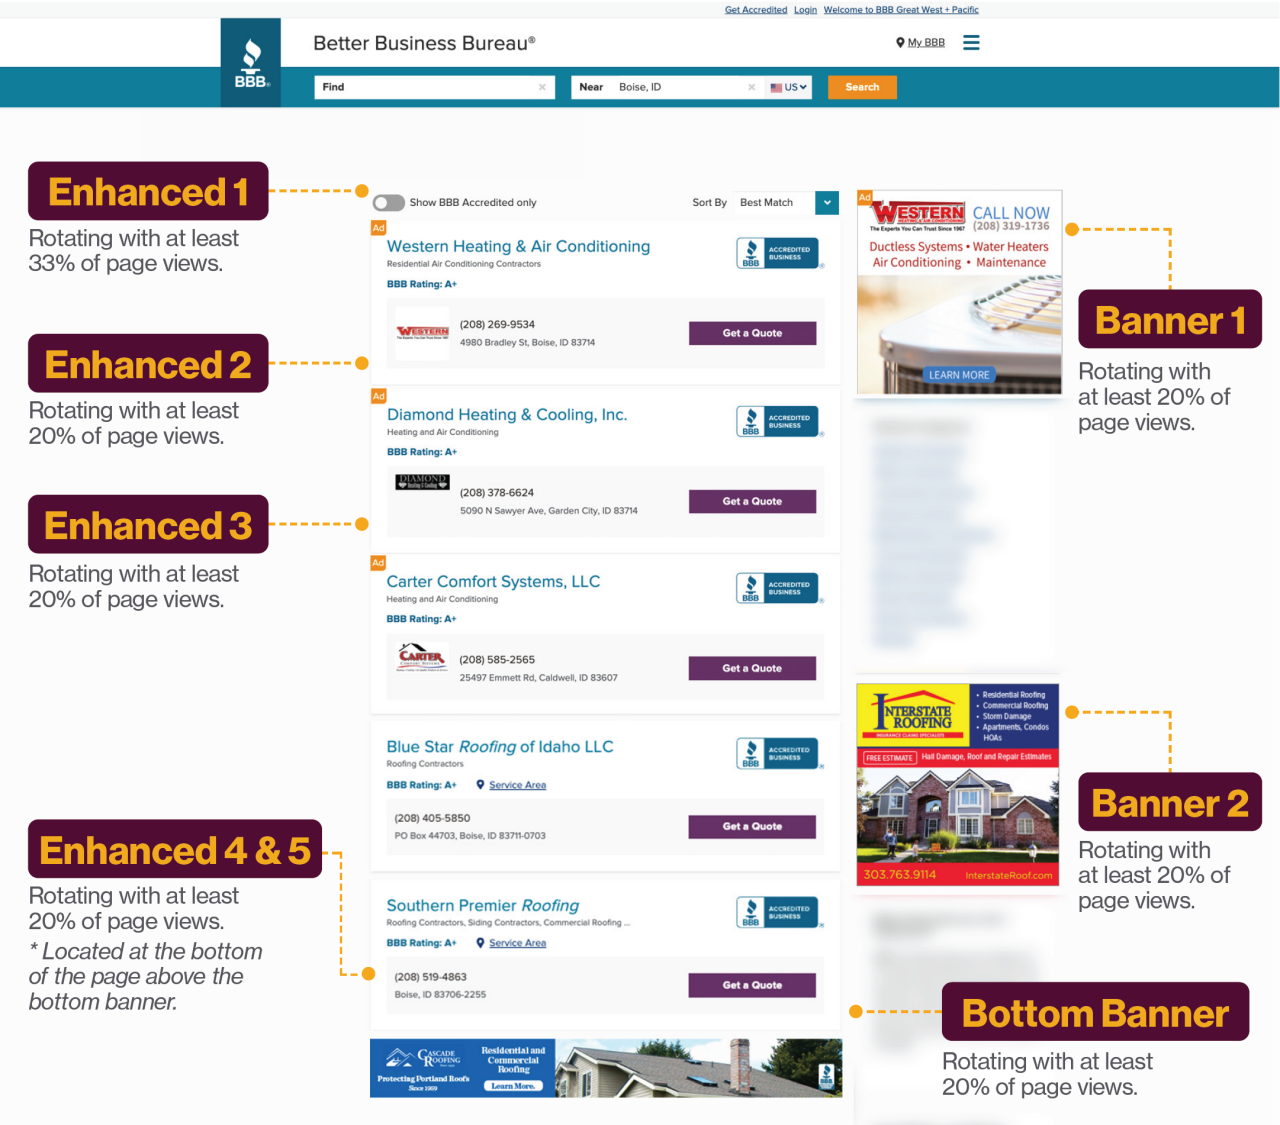 BBB.org Search showing the placement of the different Enhanced and Banner ads.